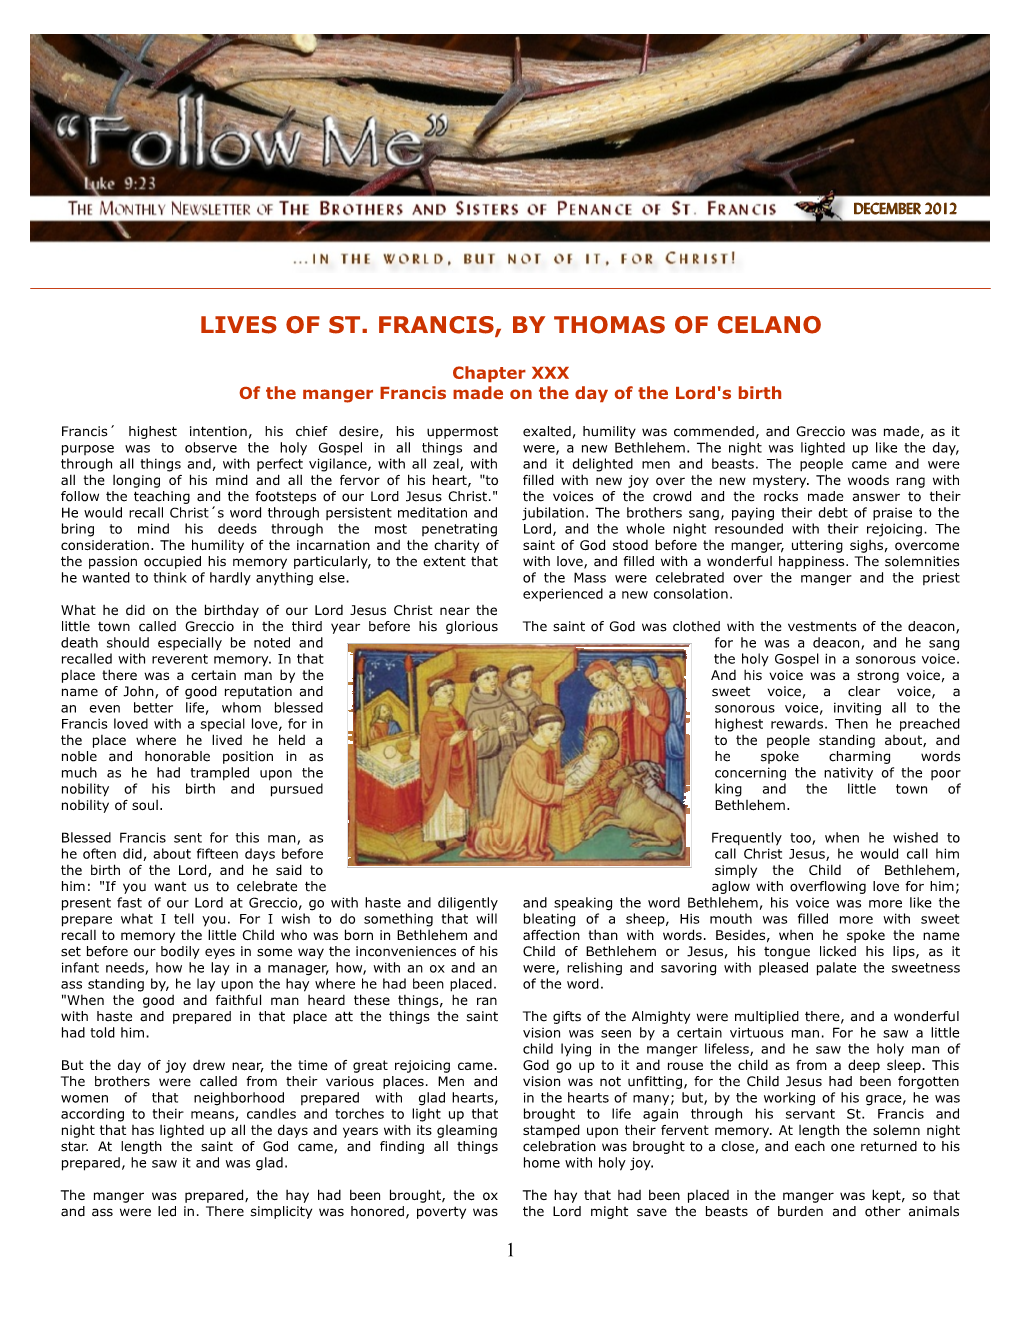 Lives of St. Francis, by Thomas of Celano